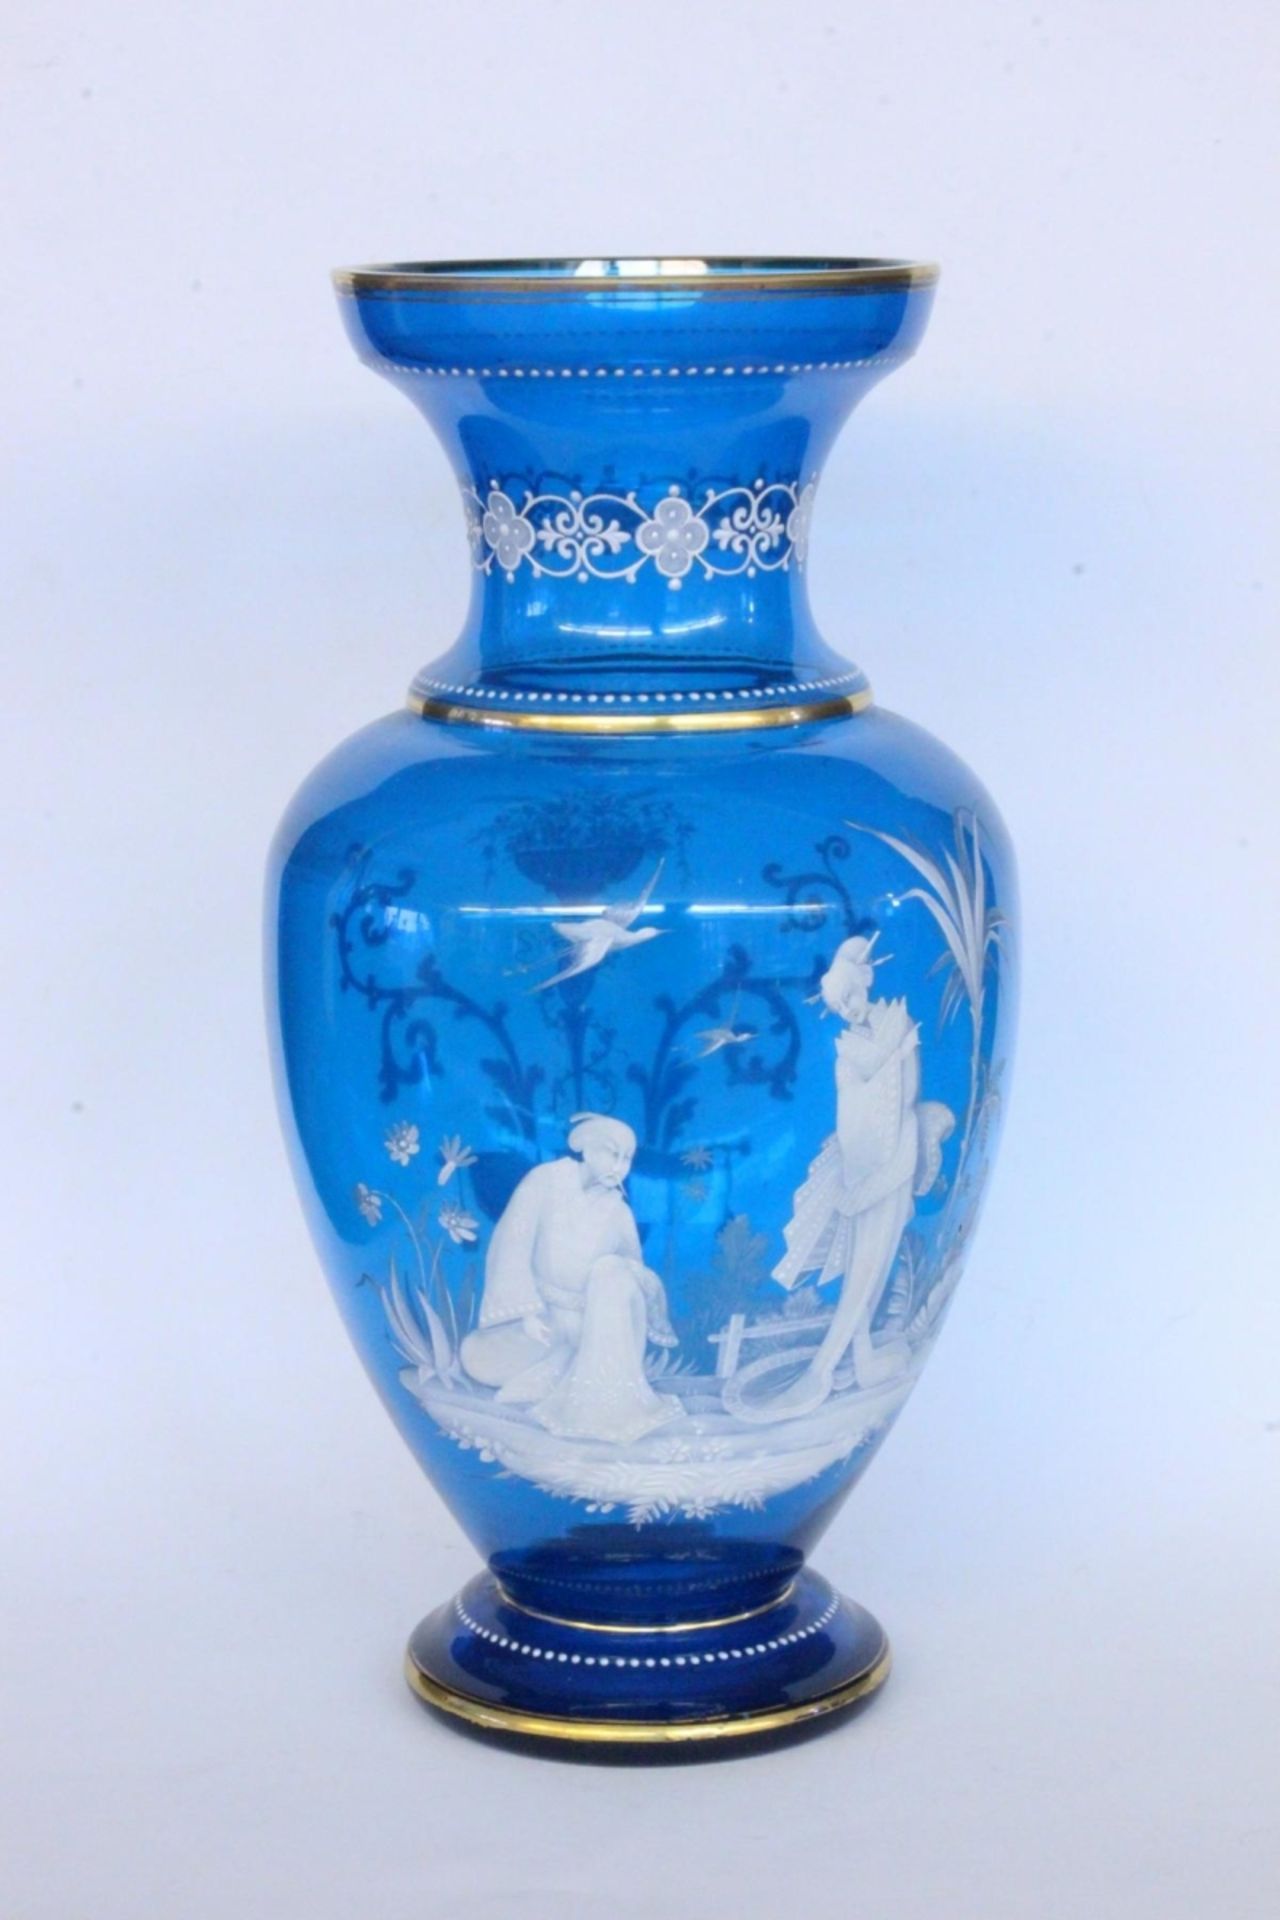 A VASE circa 1900 Blue glass with white enamel painting in Chinese style. 31.5 cm high.